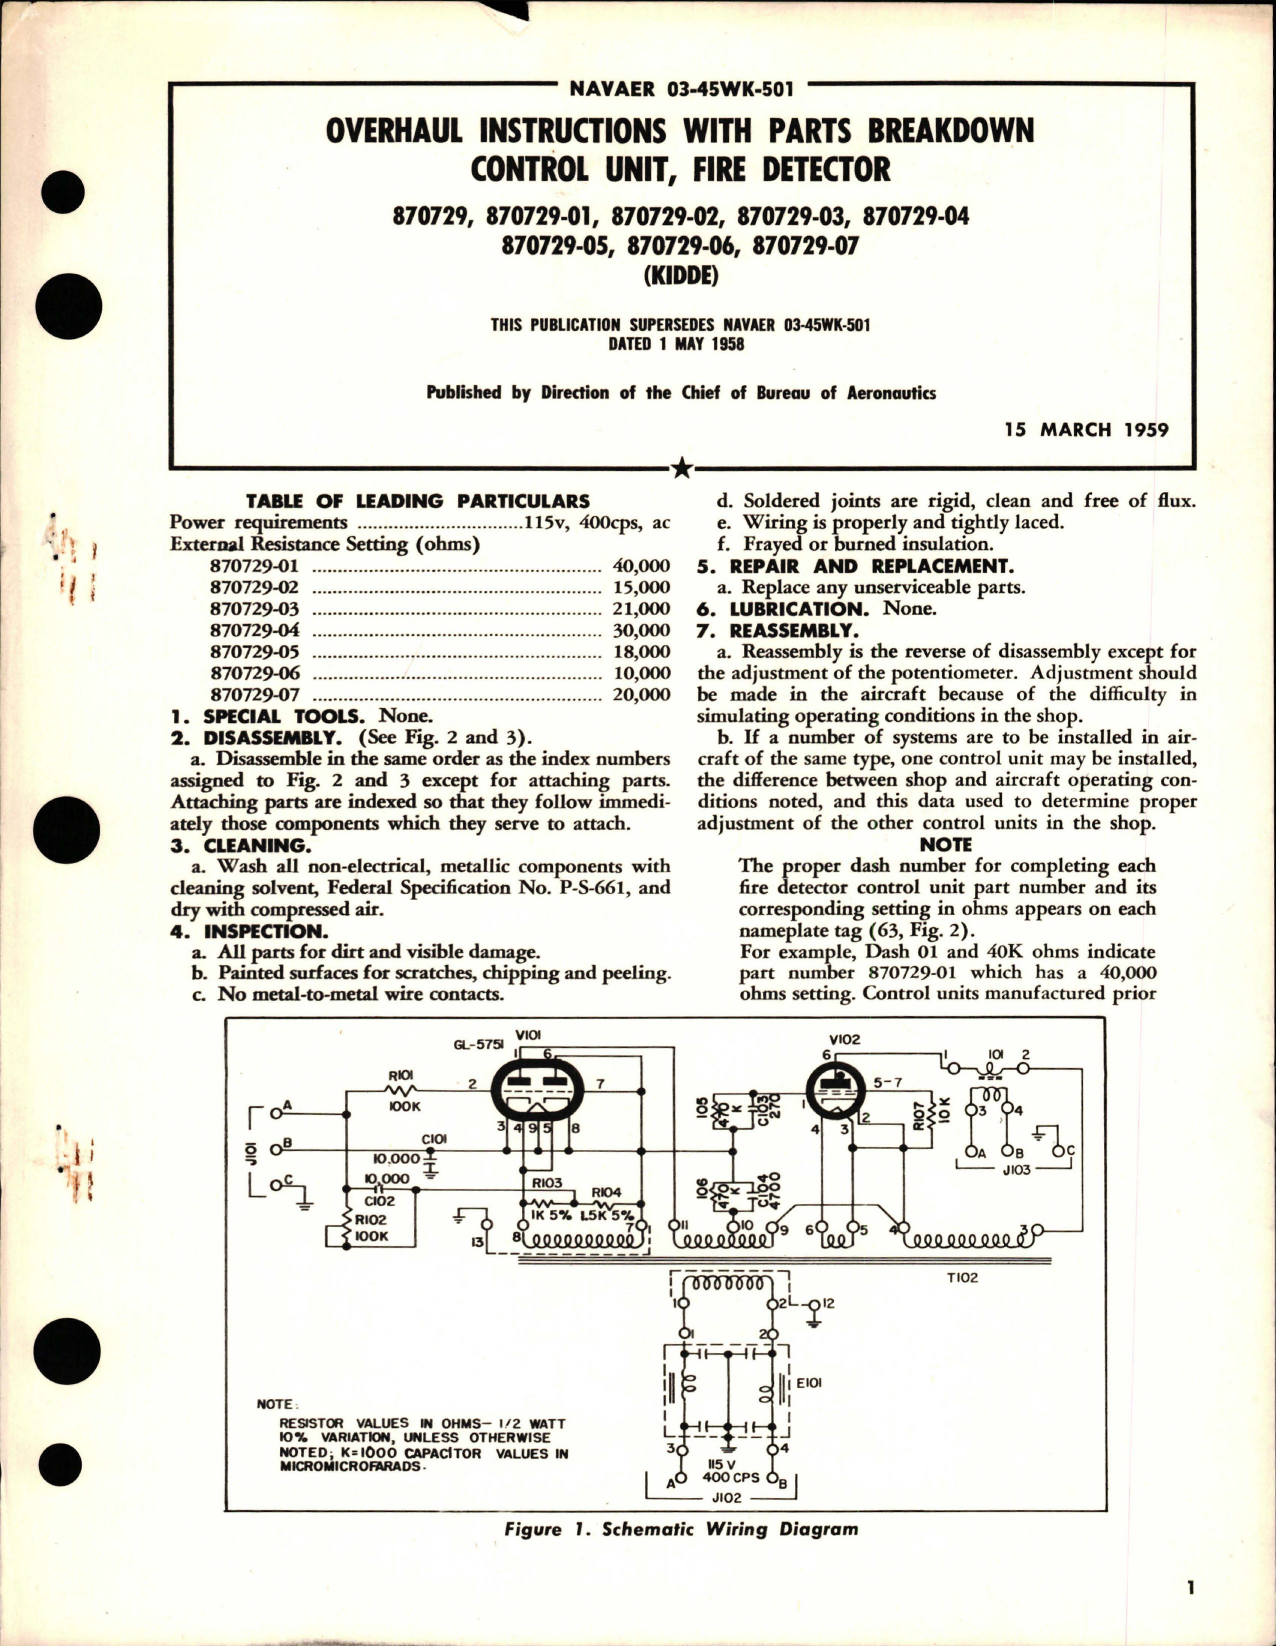 Sample page 1 from AirCorps Library document: Overhaul Instructions with Parts Breakdown for Fire Detector Control Unit